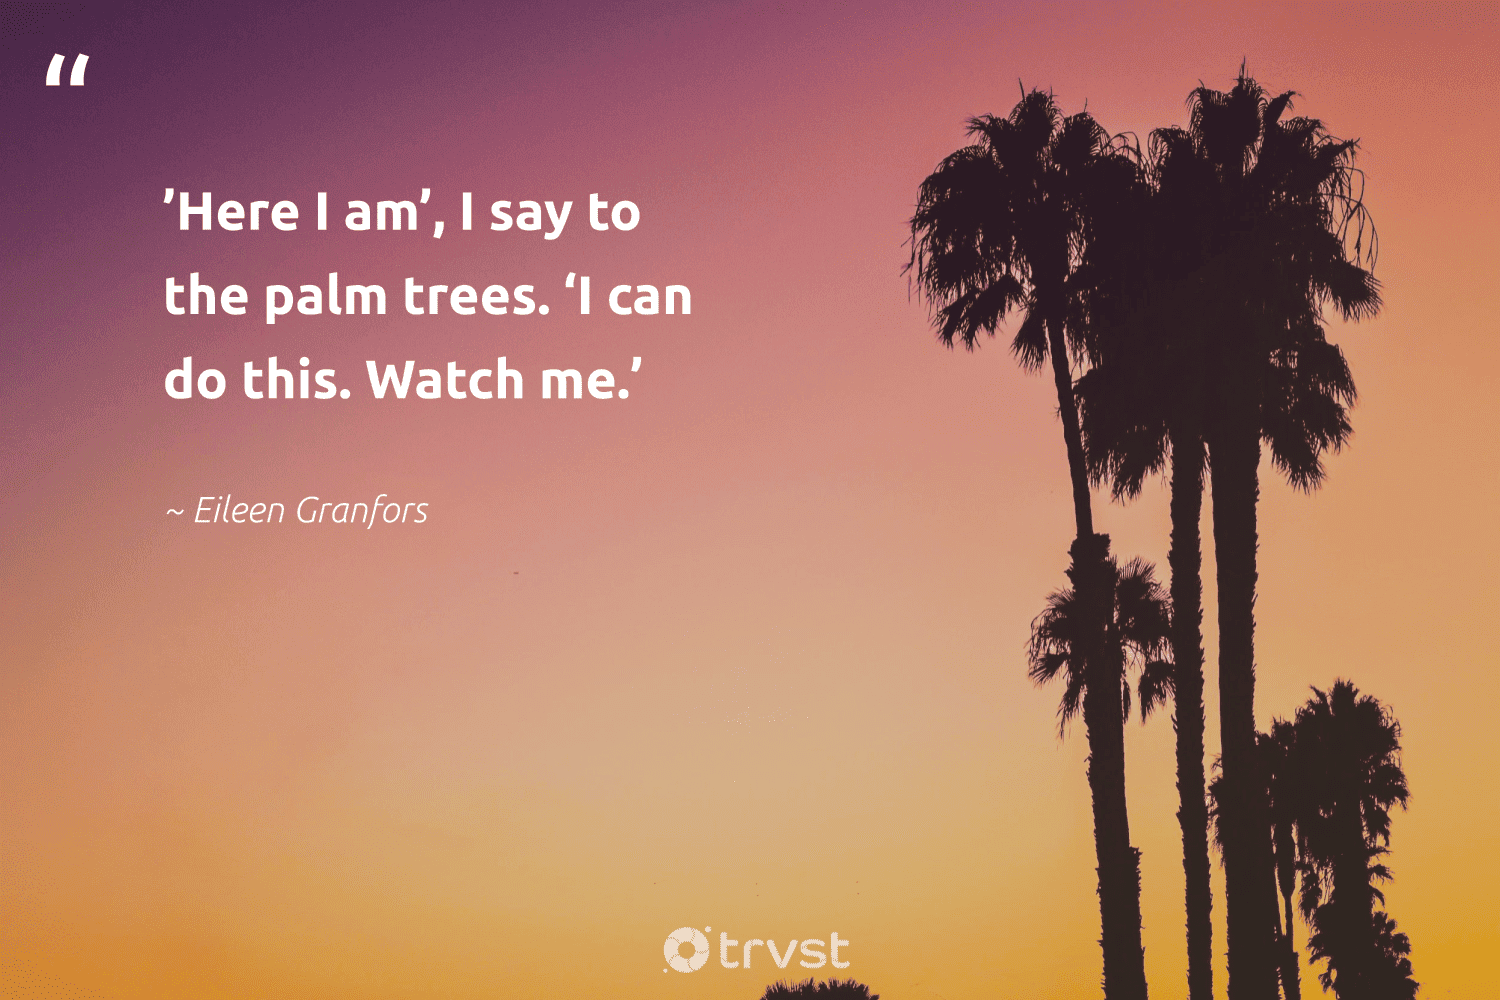 "’Here I am’, I say to the palm trees. ‘I can do this. Watch me.’" -Eileen Granfors #trvst #quotes #serenity #reflection #palmtreelove #palmtrees #palmtreelife 